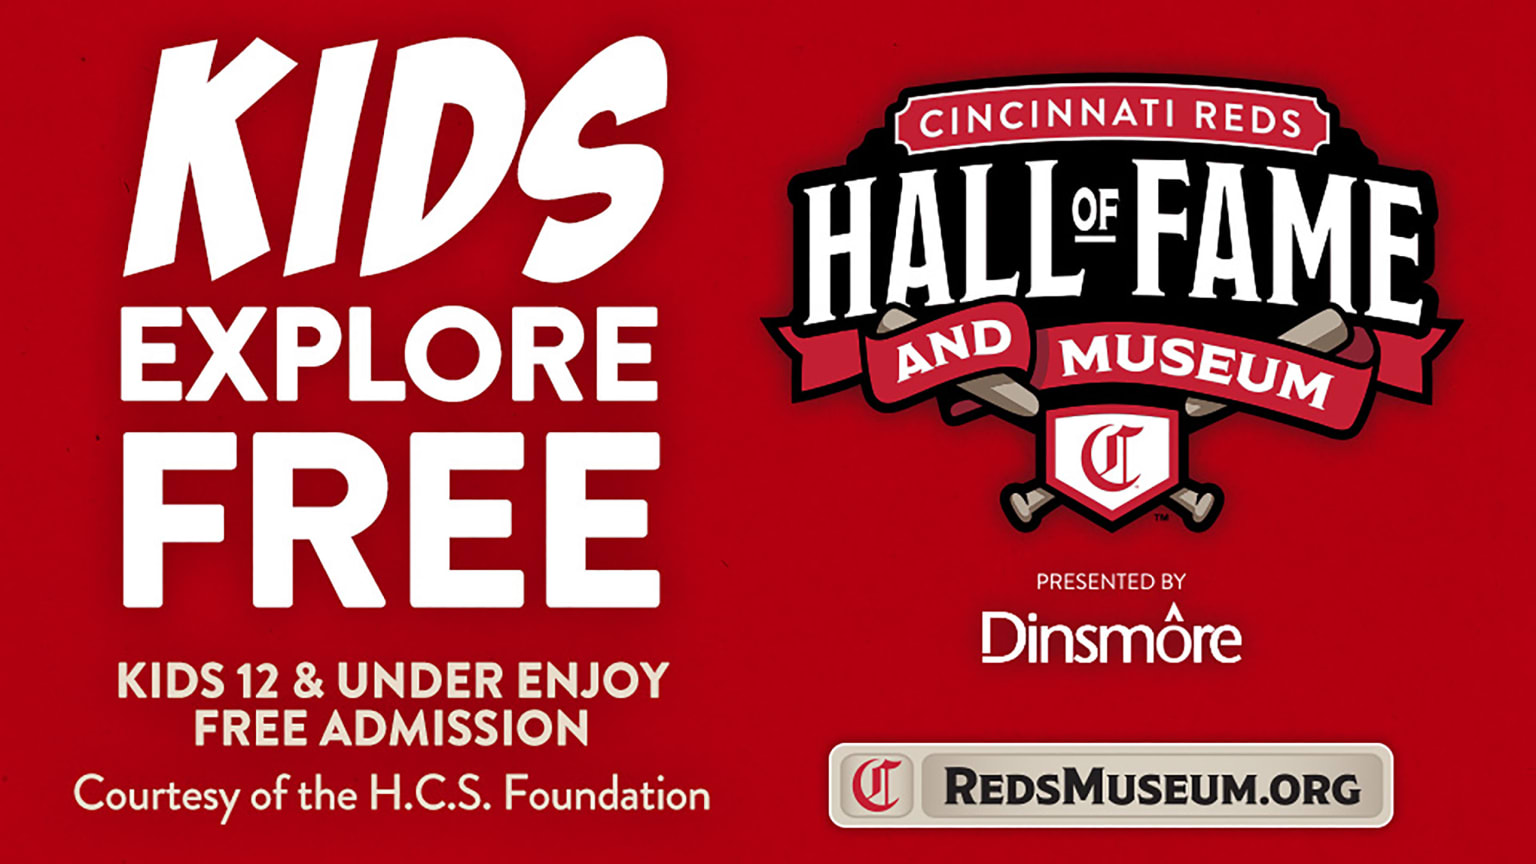 Reds Hall of Fame Hours and Pricing Cincinnati Reds